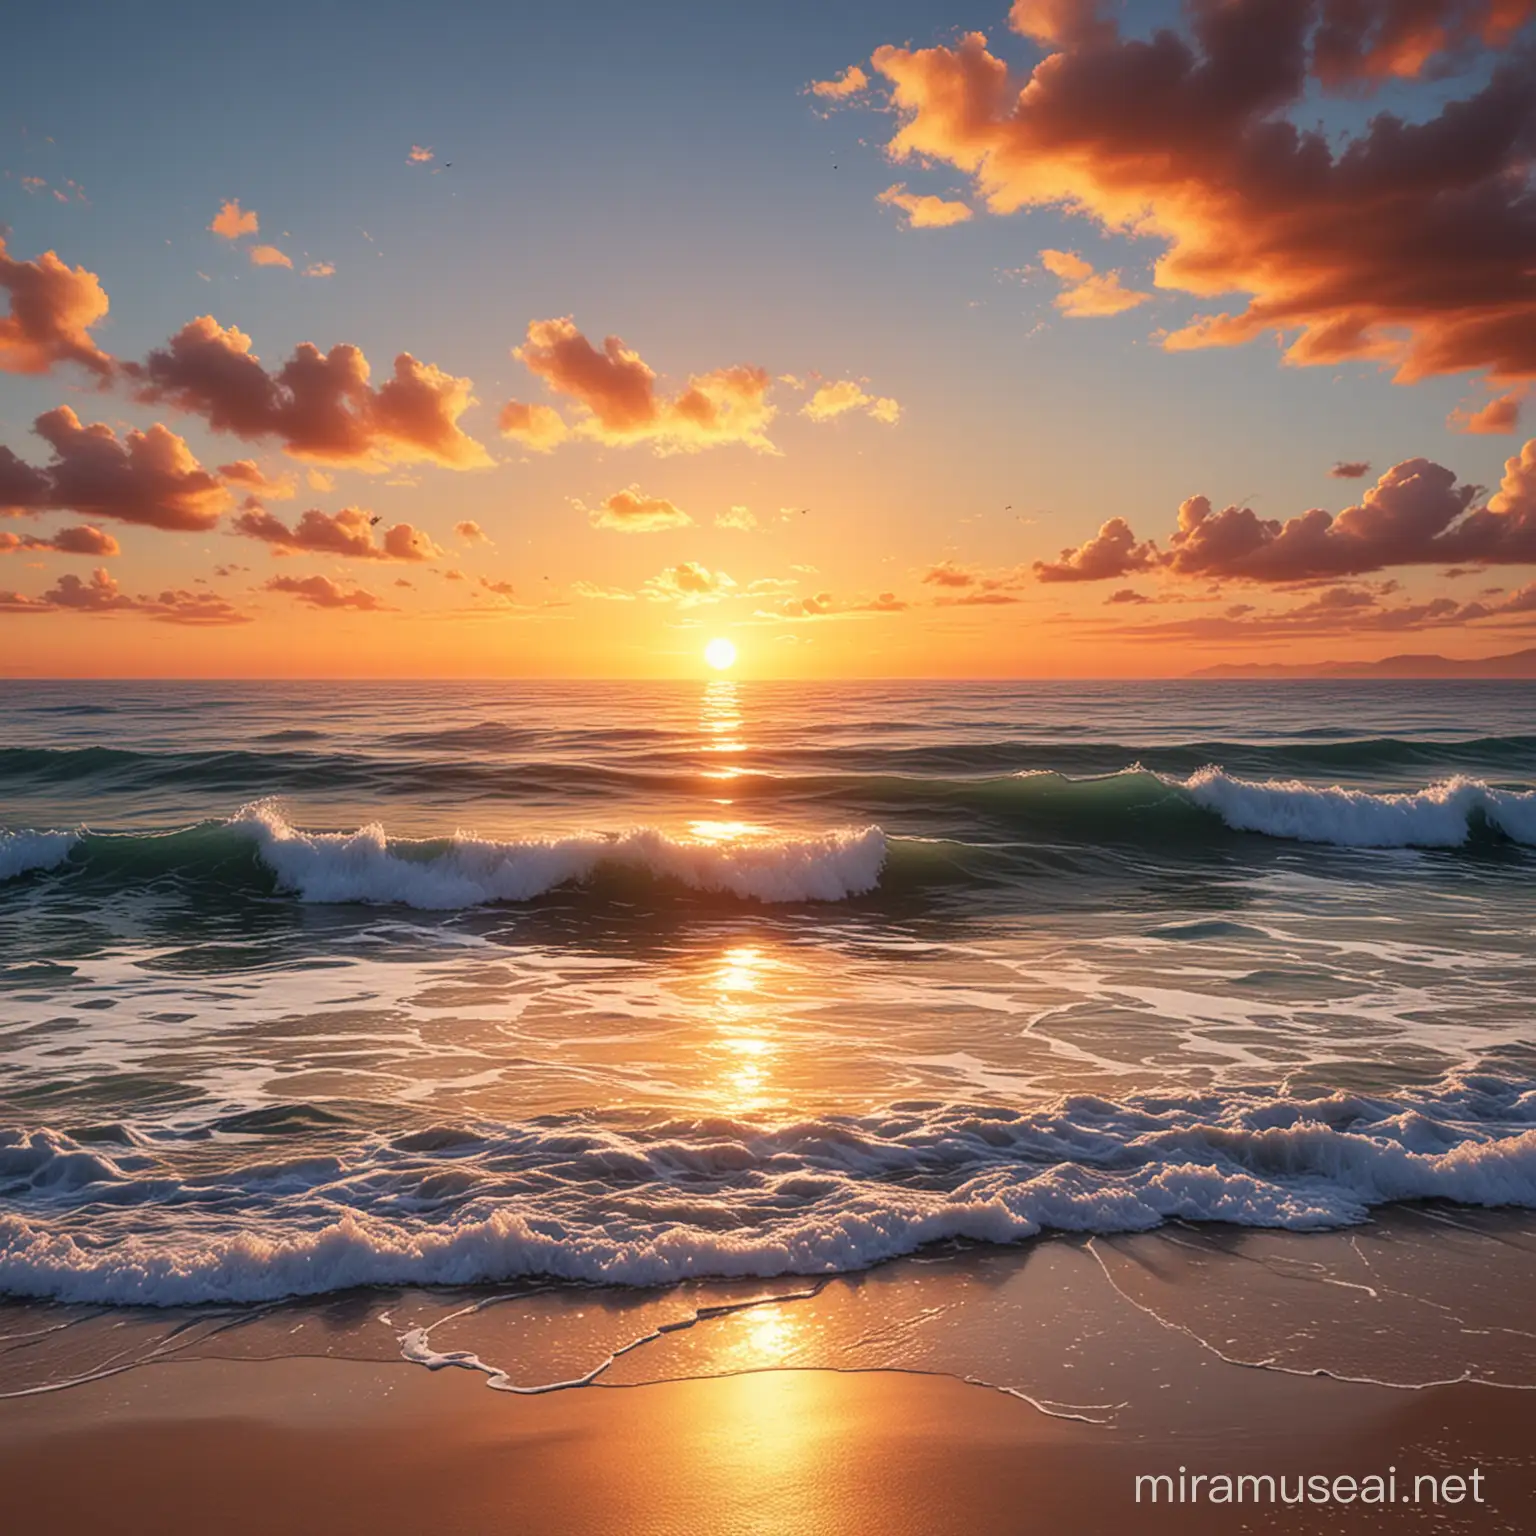 Sunset Ocean View in Realistic Art Style